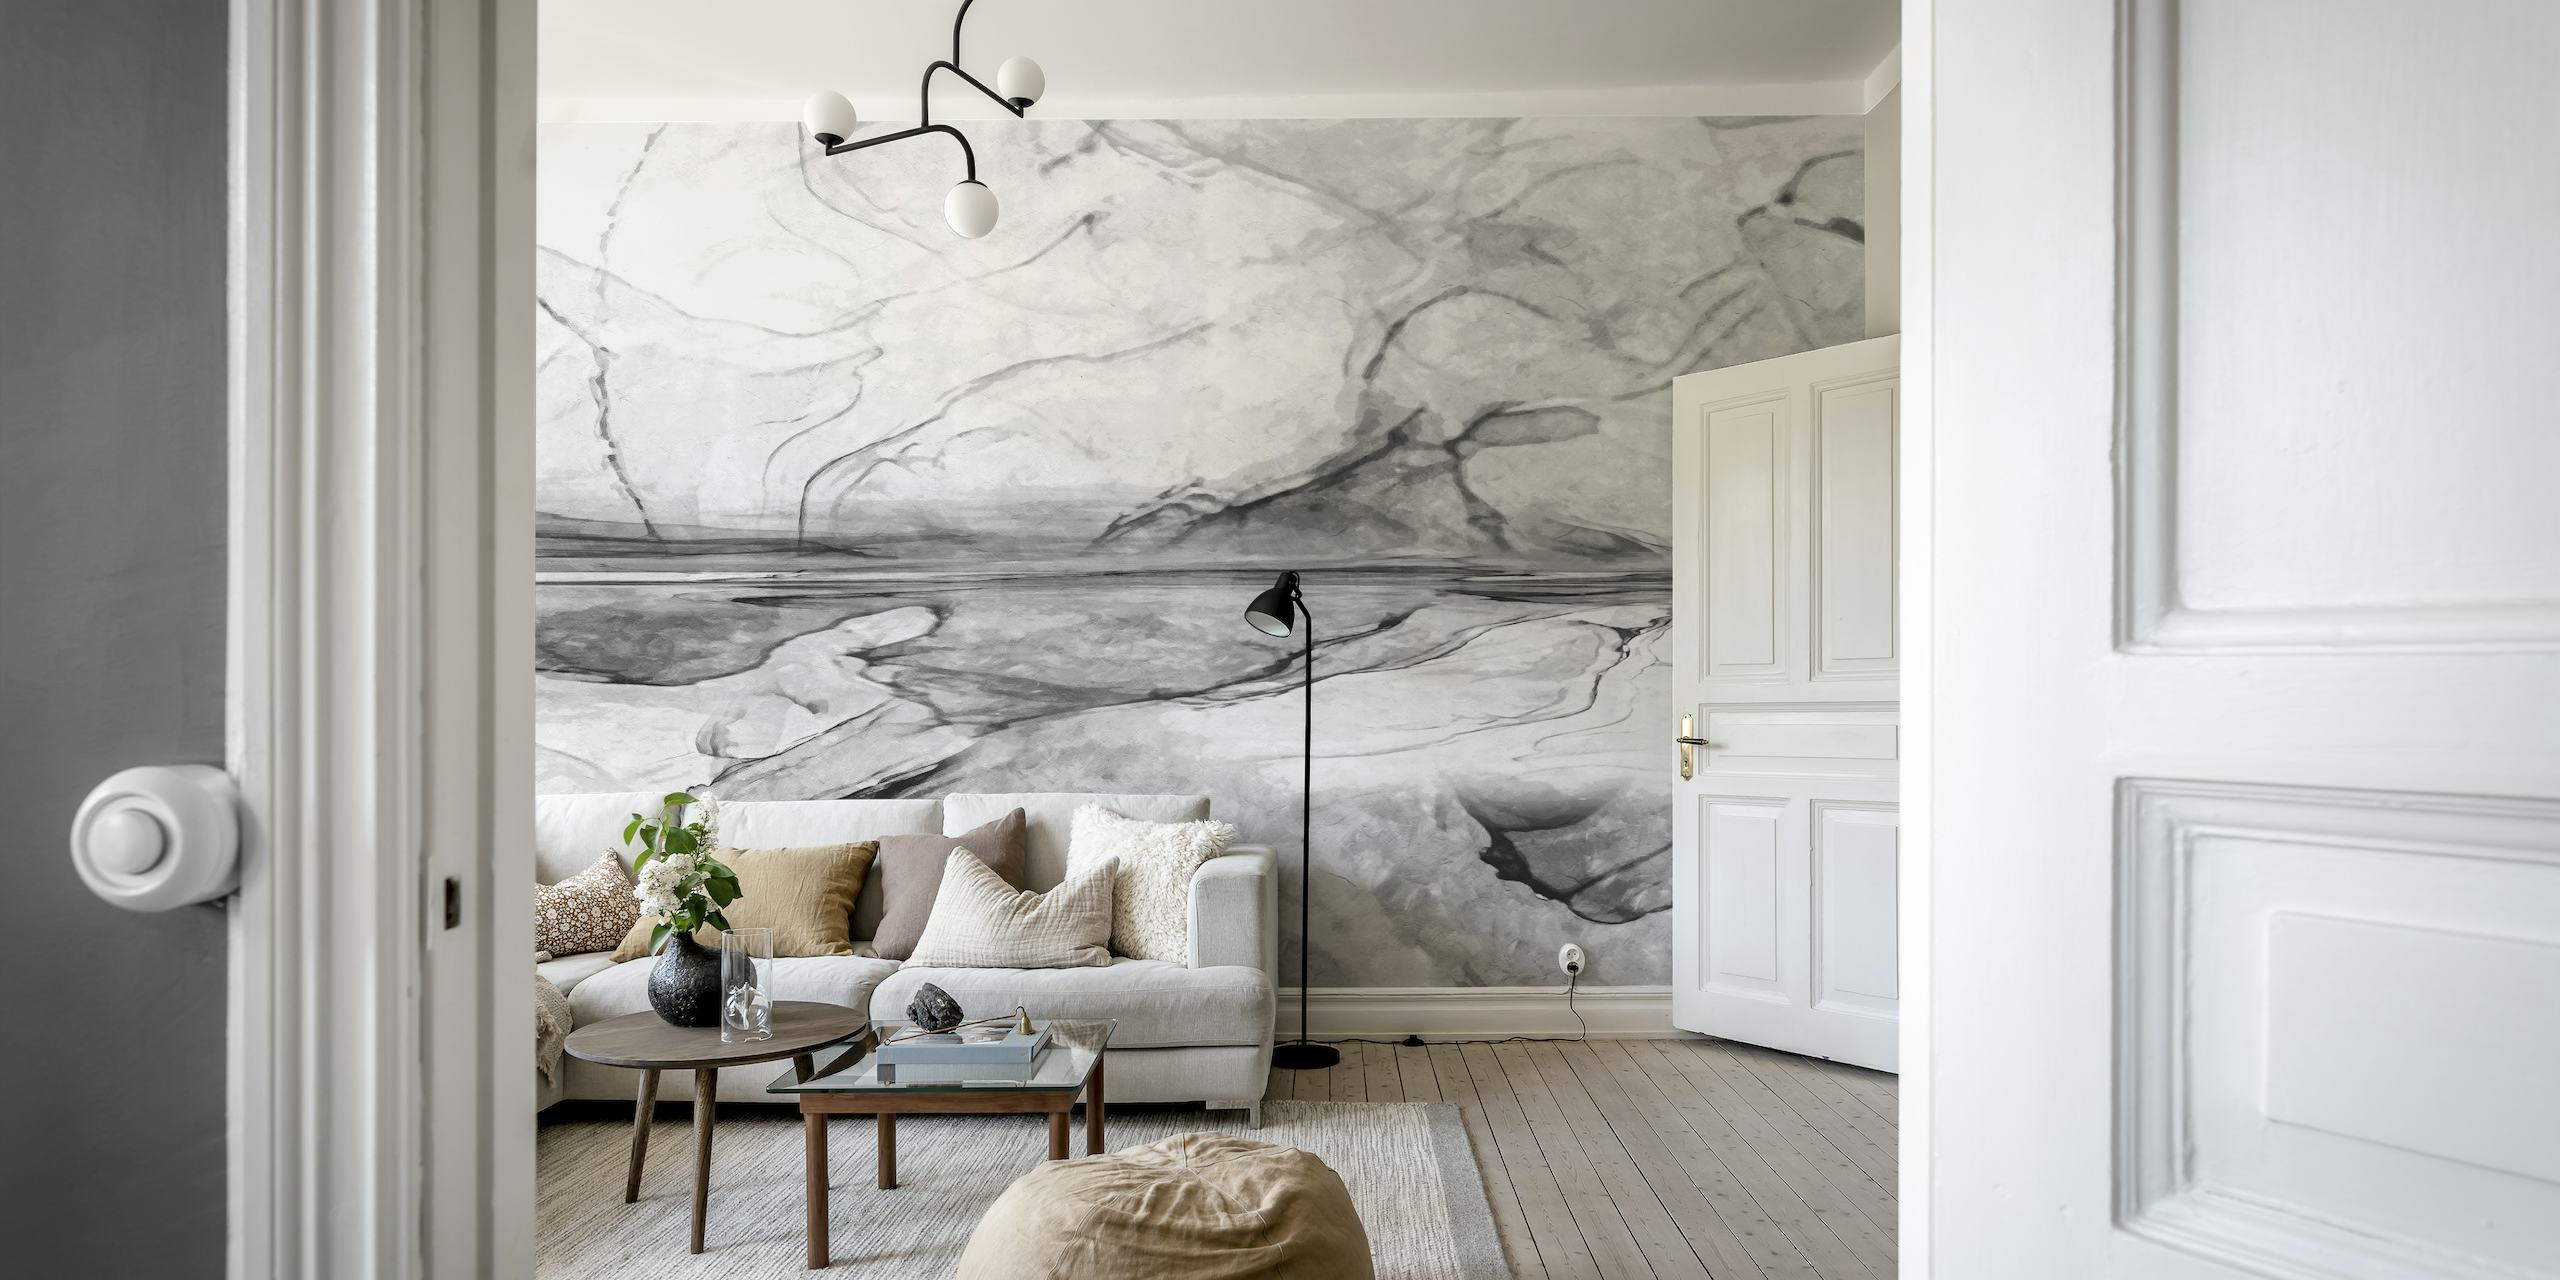 Monochromatic abstract design wall mural depicting natural stone patterns